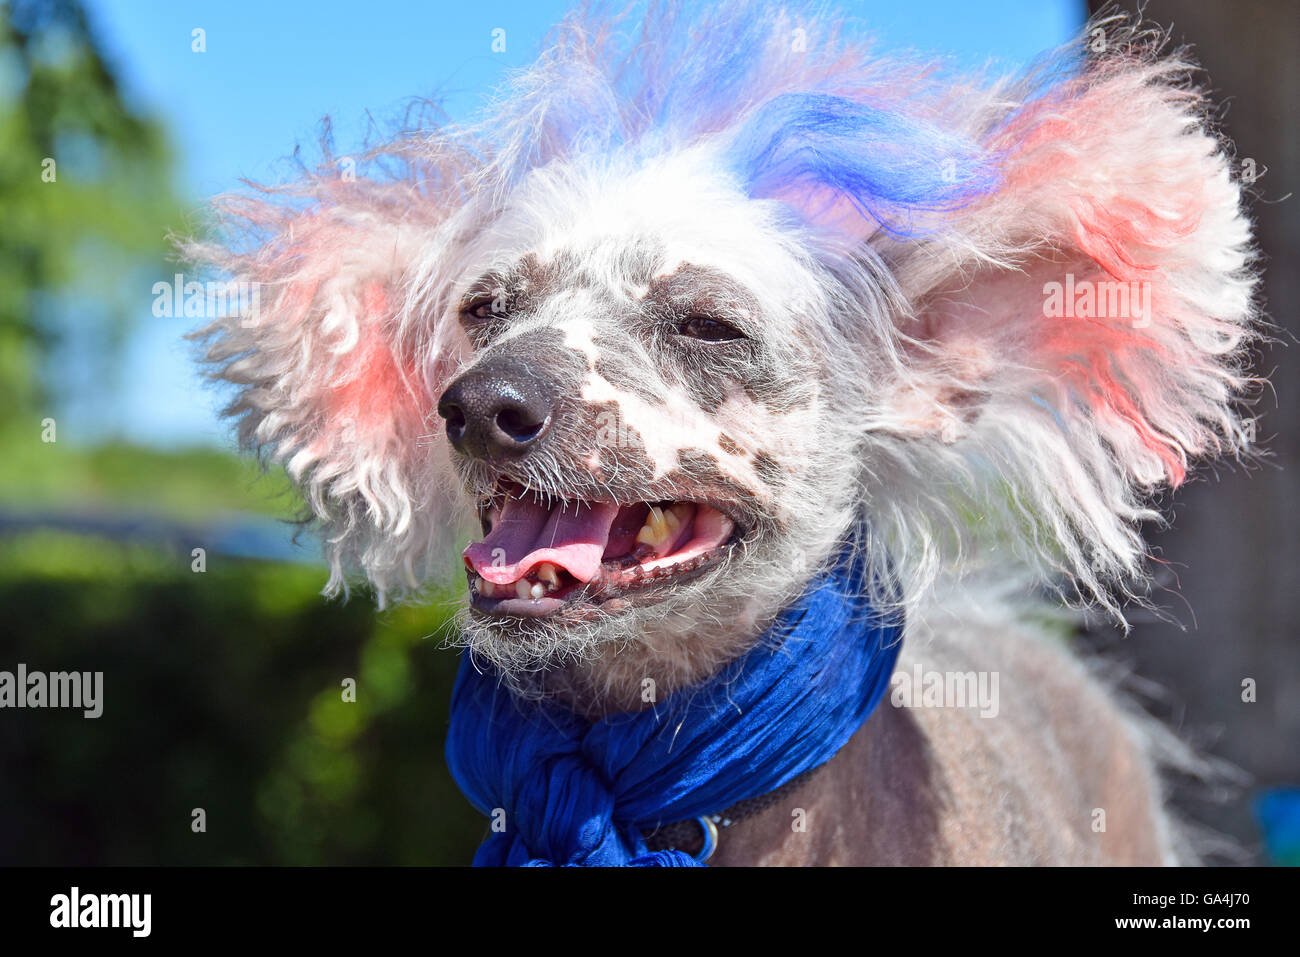 Chinese Crested Hairless dog with blue scarf and red and blue dyed fur for patriotic holiday. Stock Photo